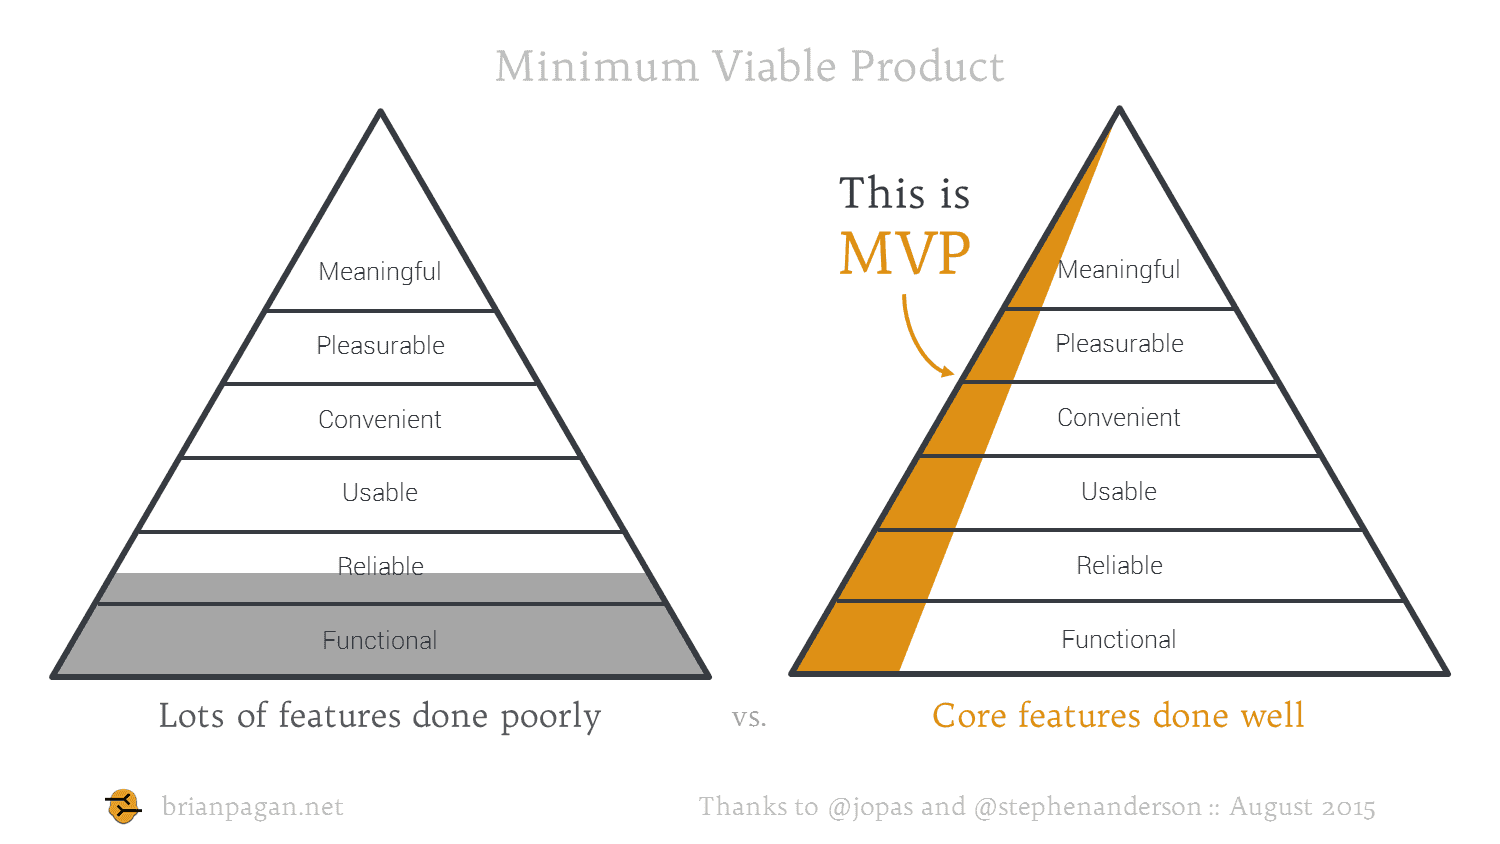 Minimum Viable Product (MVP) is about creating meaningful products for your target audience.